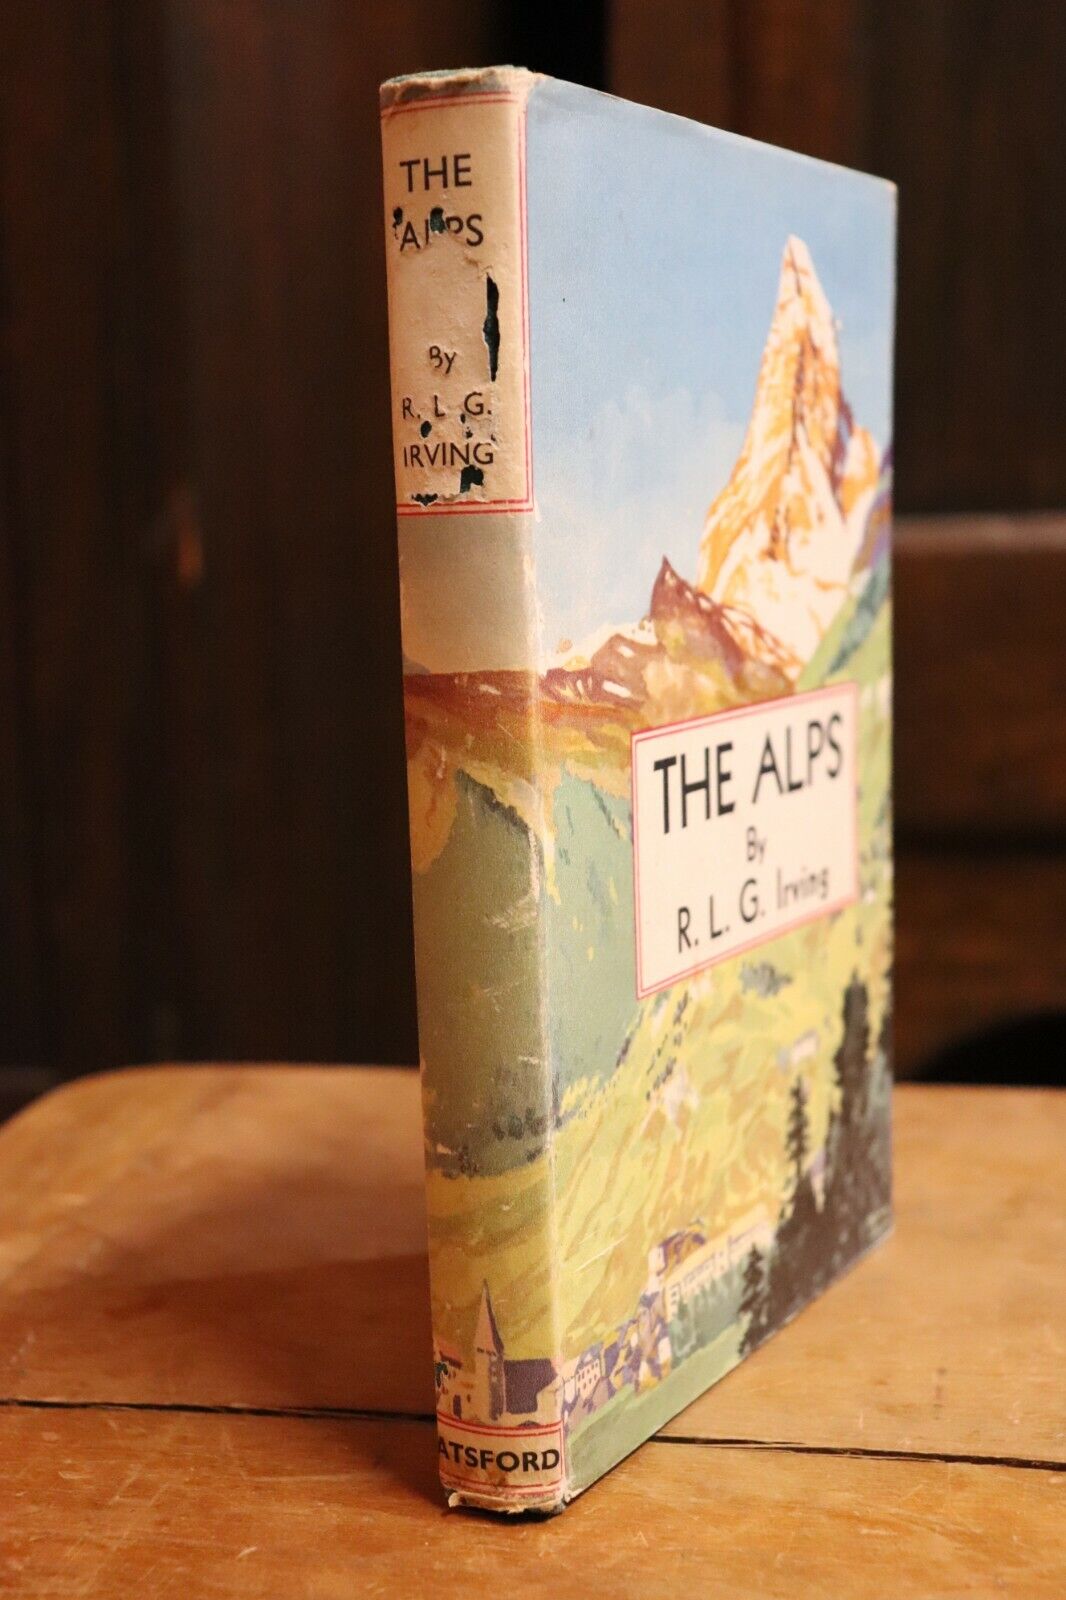 The Alps - R.L.G Irving - 1947 - Rare Antique Travel Book - Mountaineering - 0